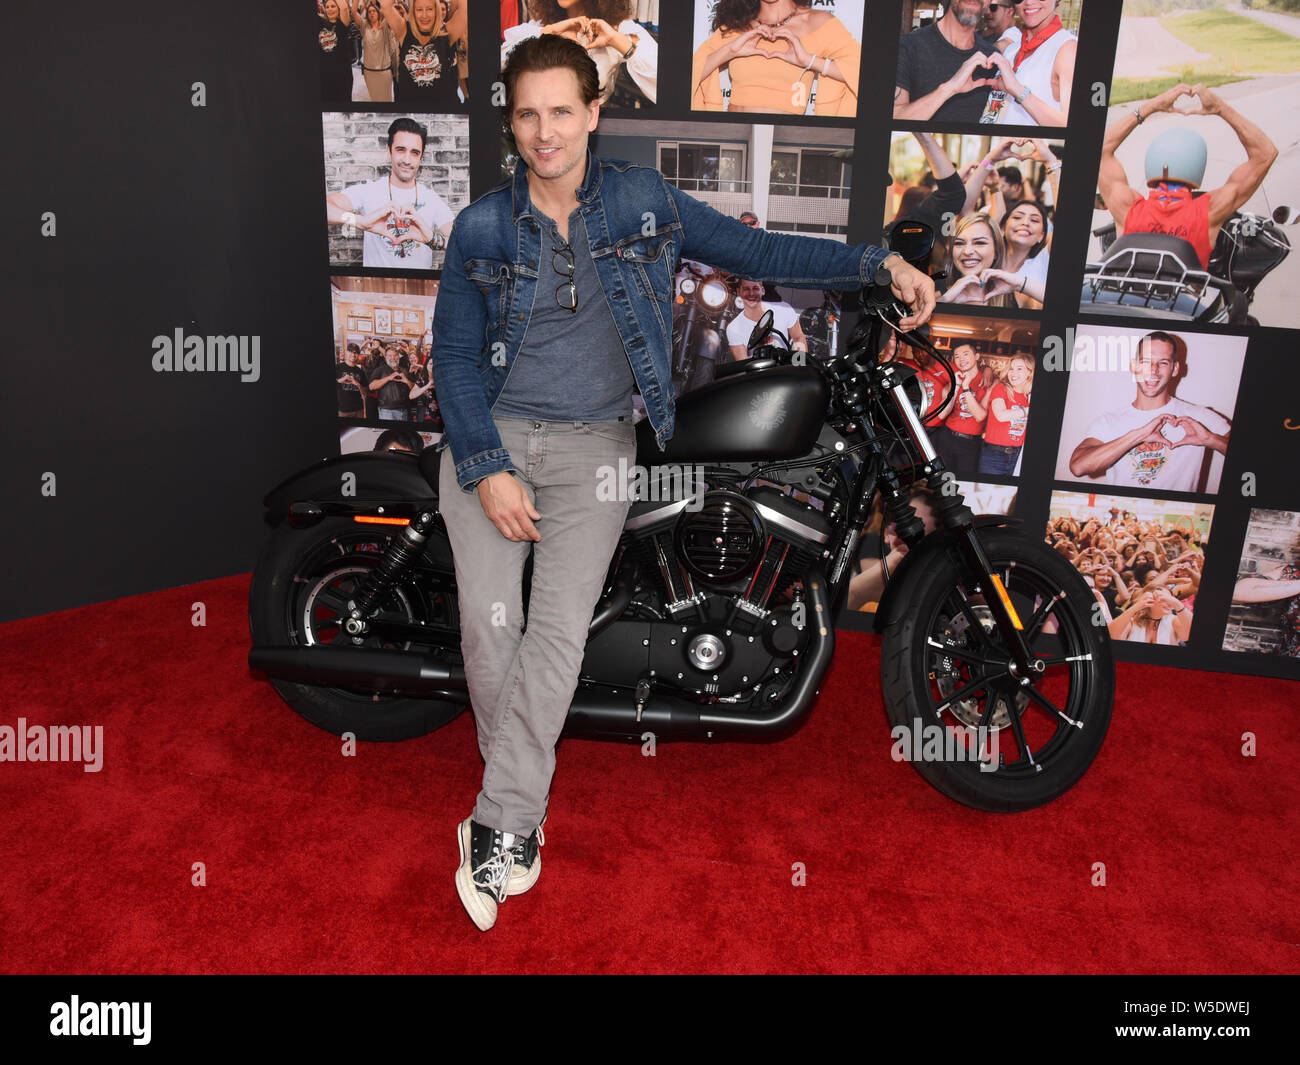 Peter Facinelli attends the 10th Anniversary Of Kiehl's LifeRide For amfAR To Benefit HIV/AIDS Research in Century City at Westfield Century City in Century City  on July 27 2019. Stock Photo